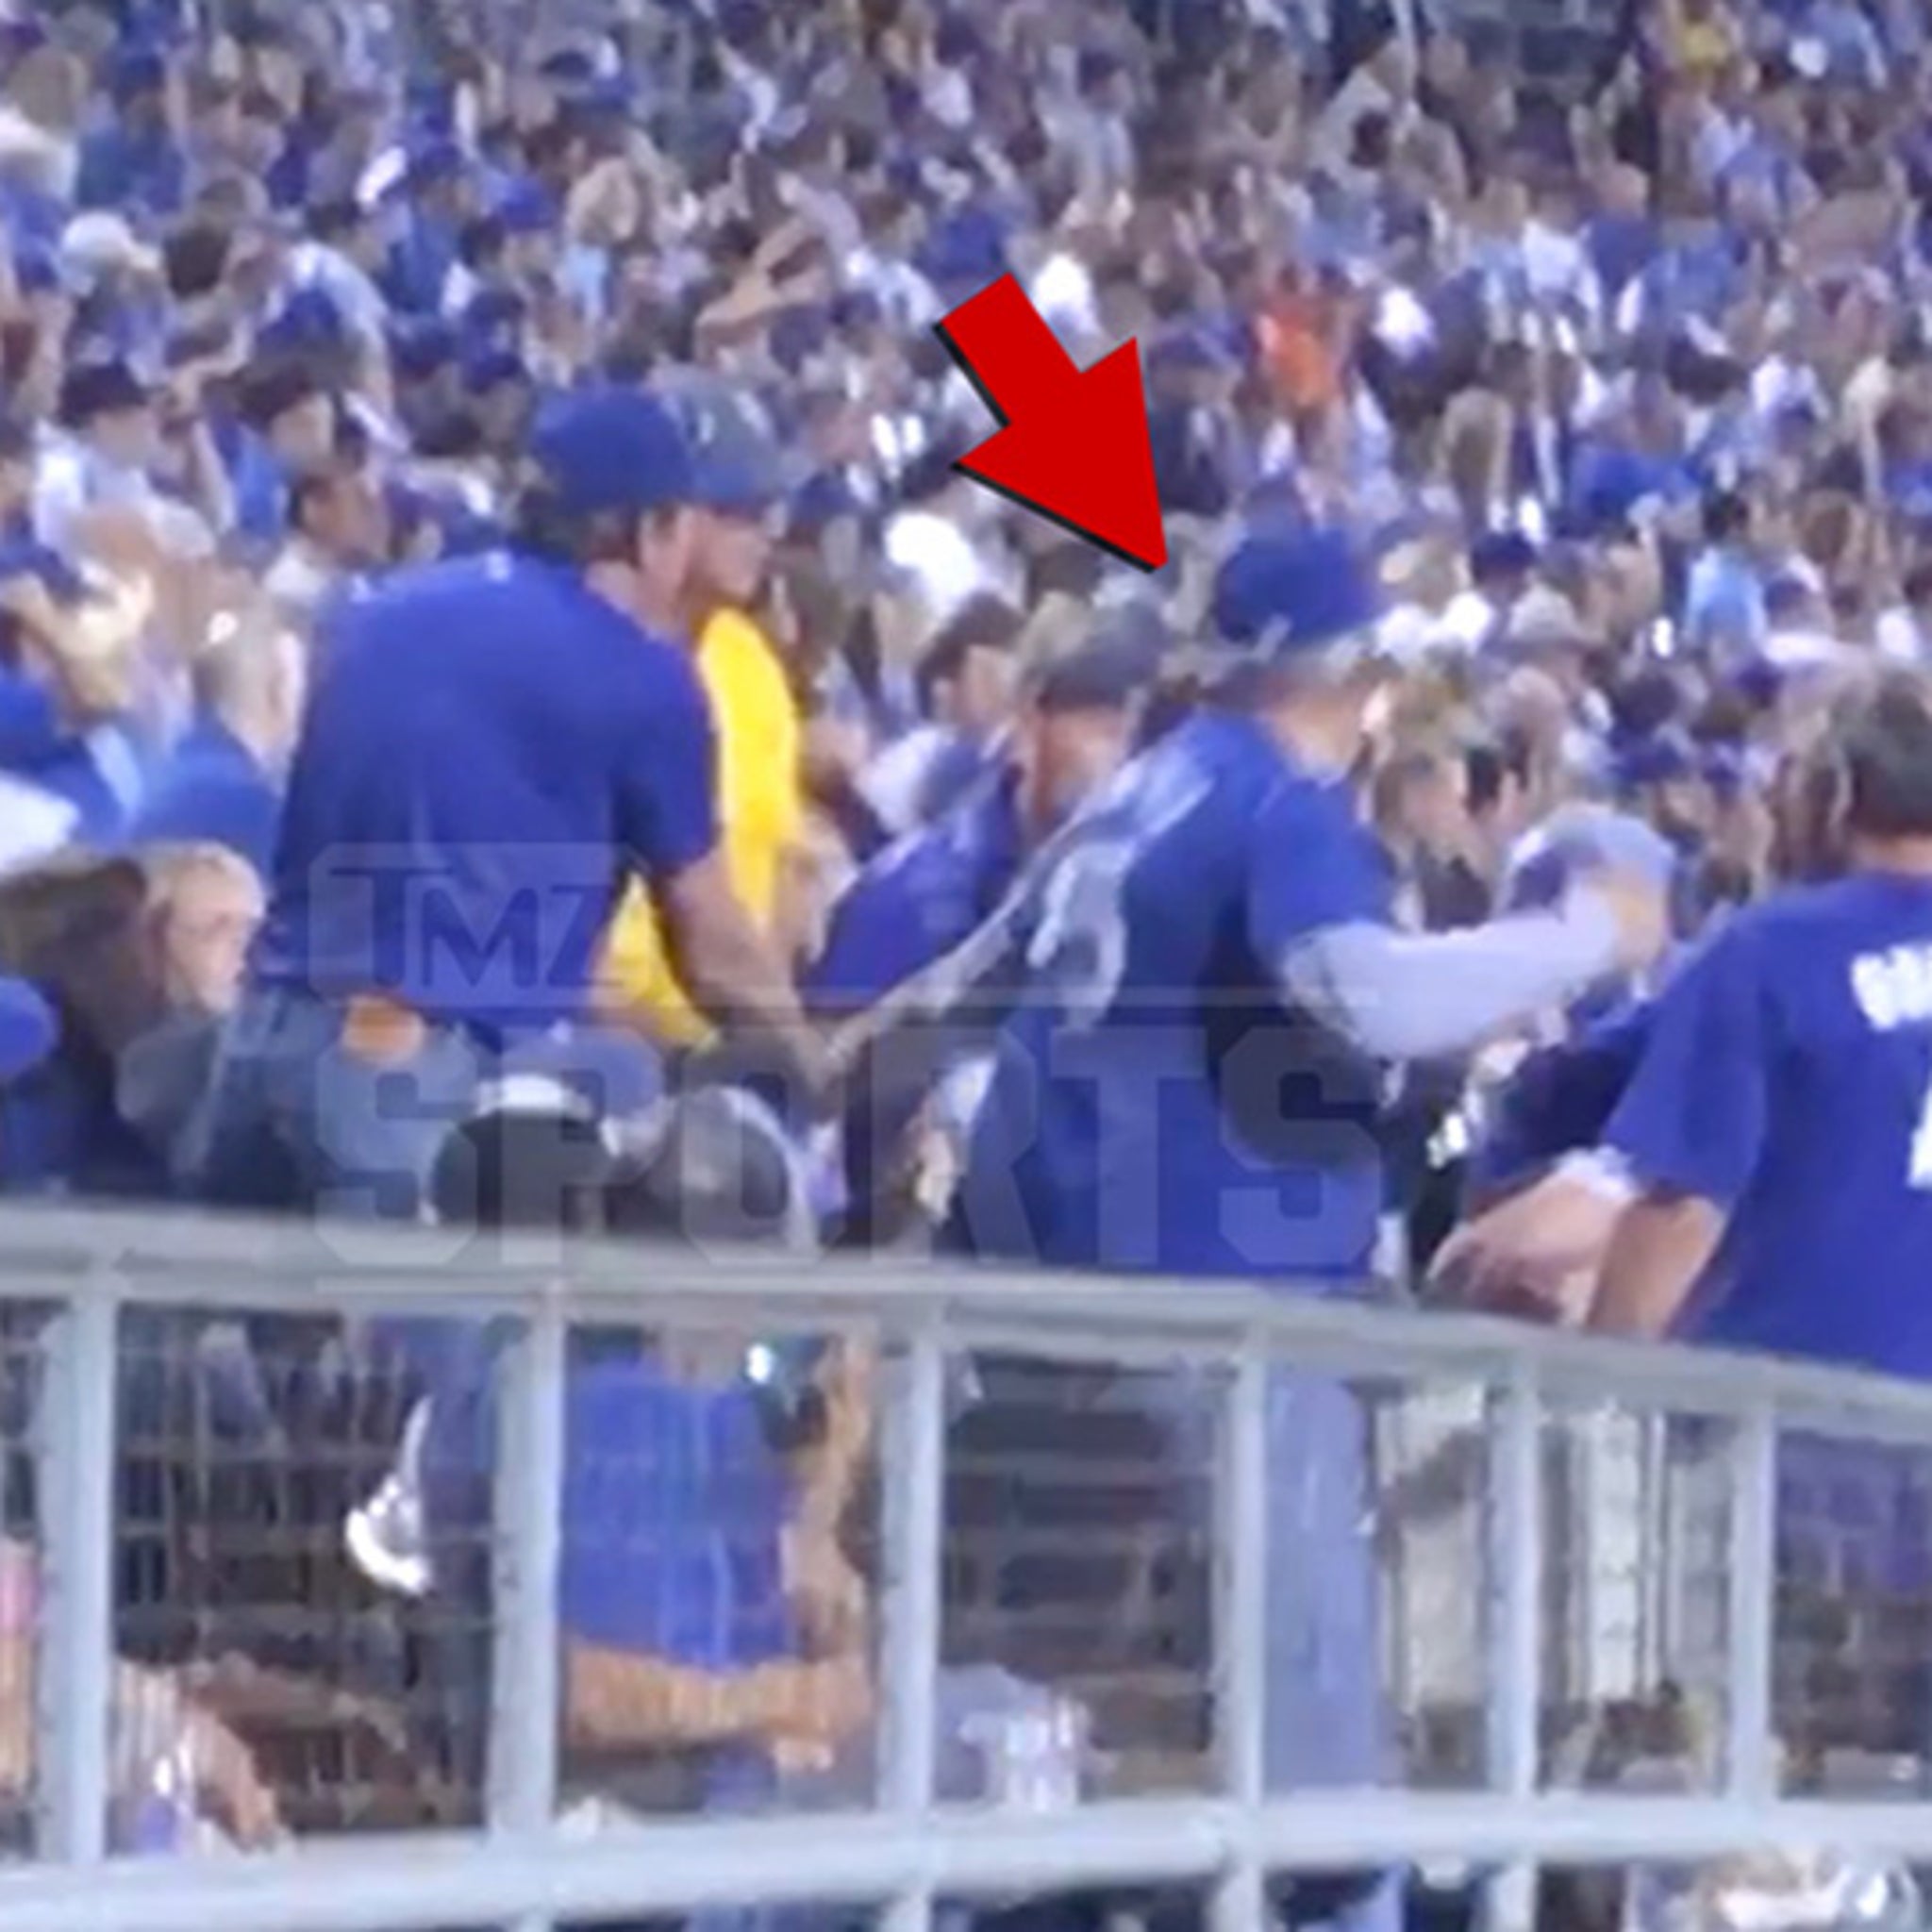 Kc Royals Fan Punches Woman After She Allegedly Hits And Spits On Him